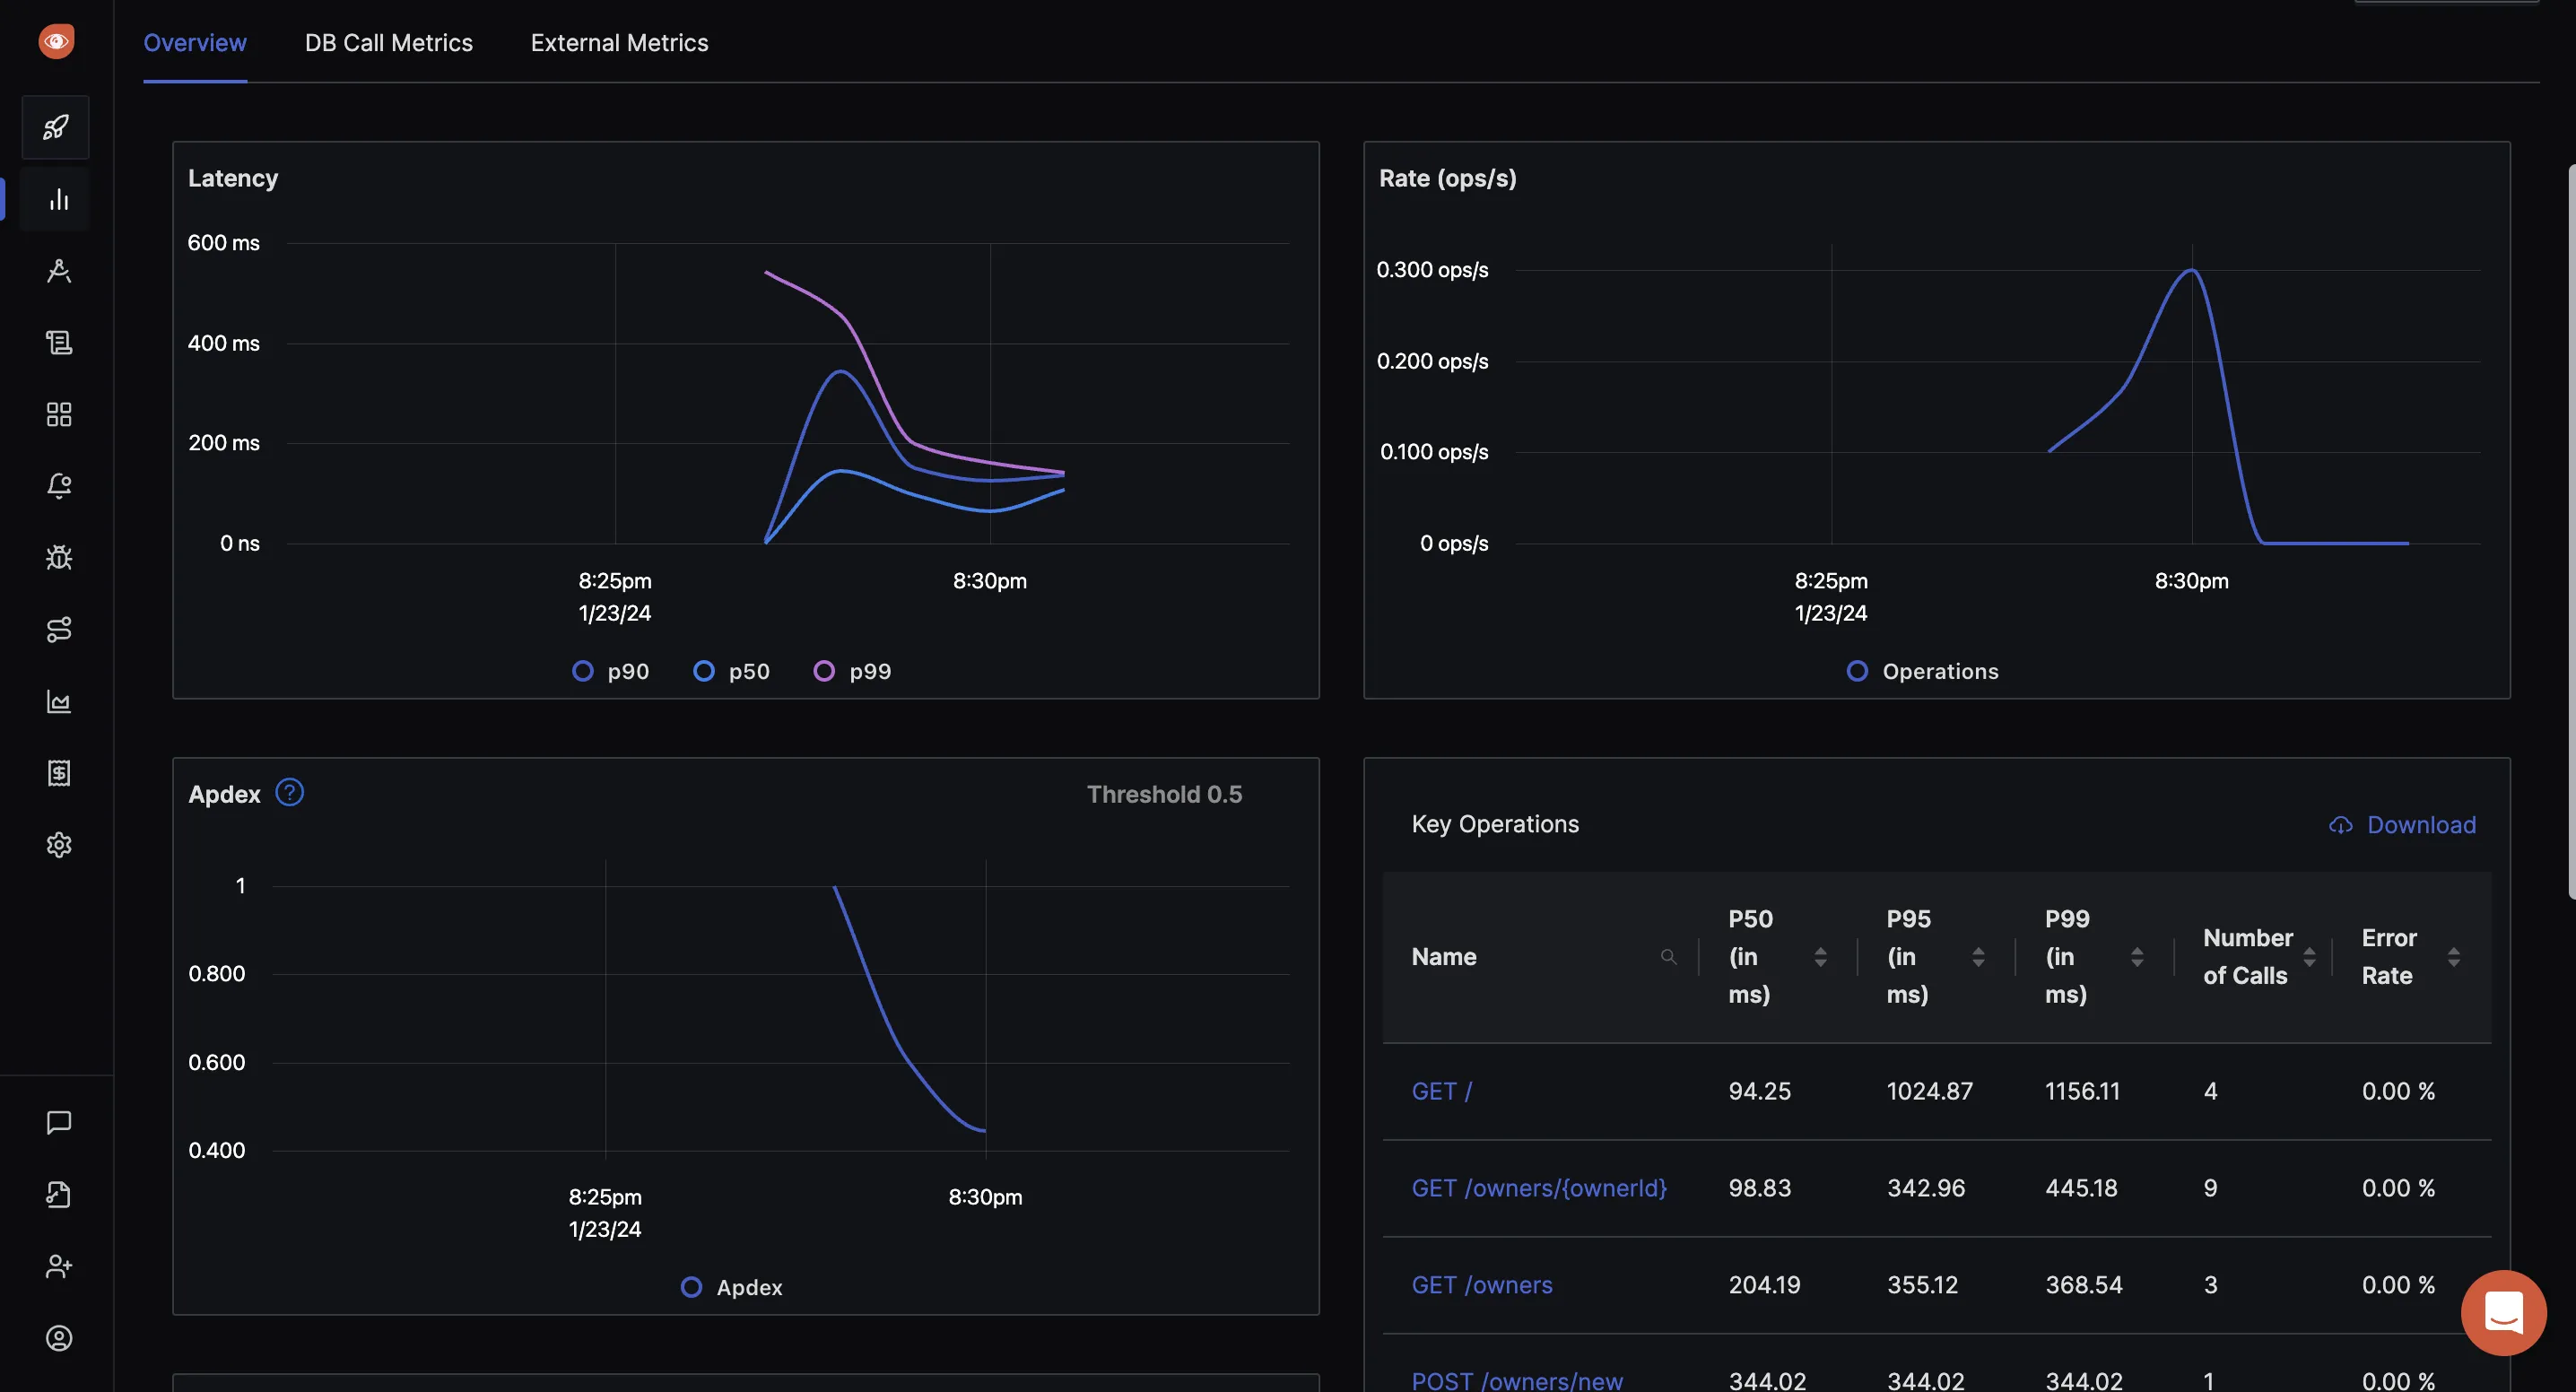 SigNoz dashboard showing application latency, requests per sec, error percentage and top endpoints